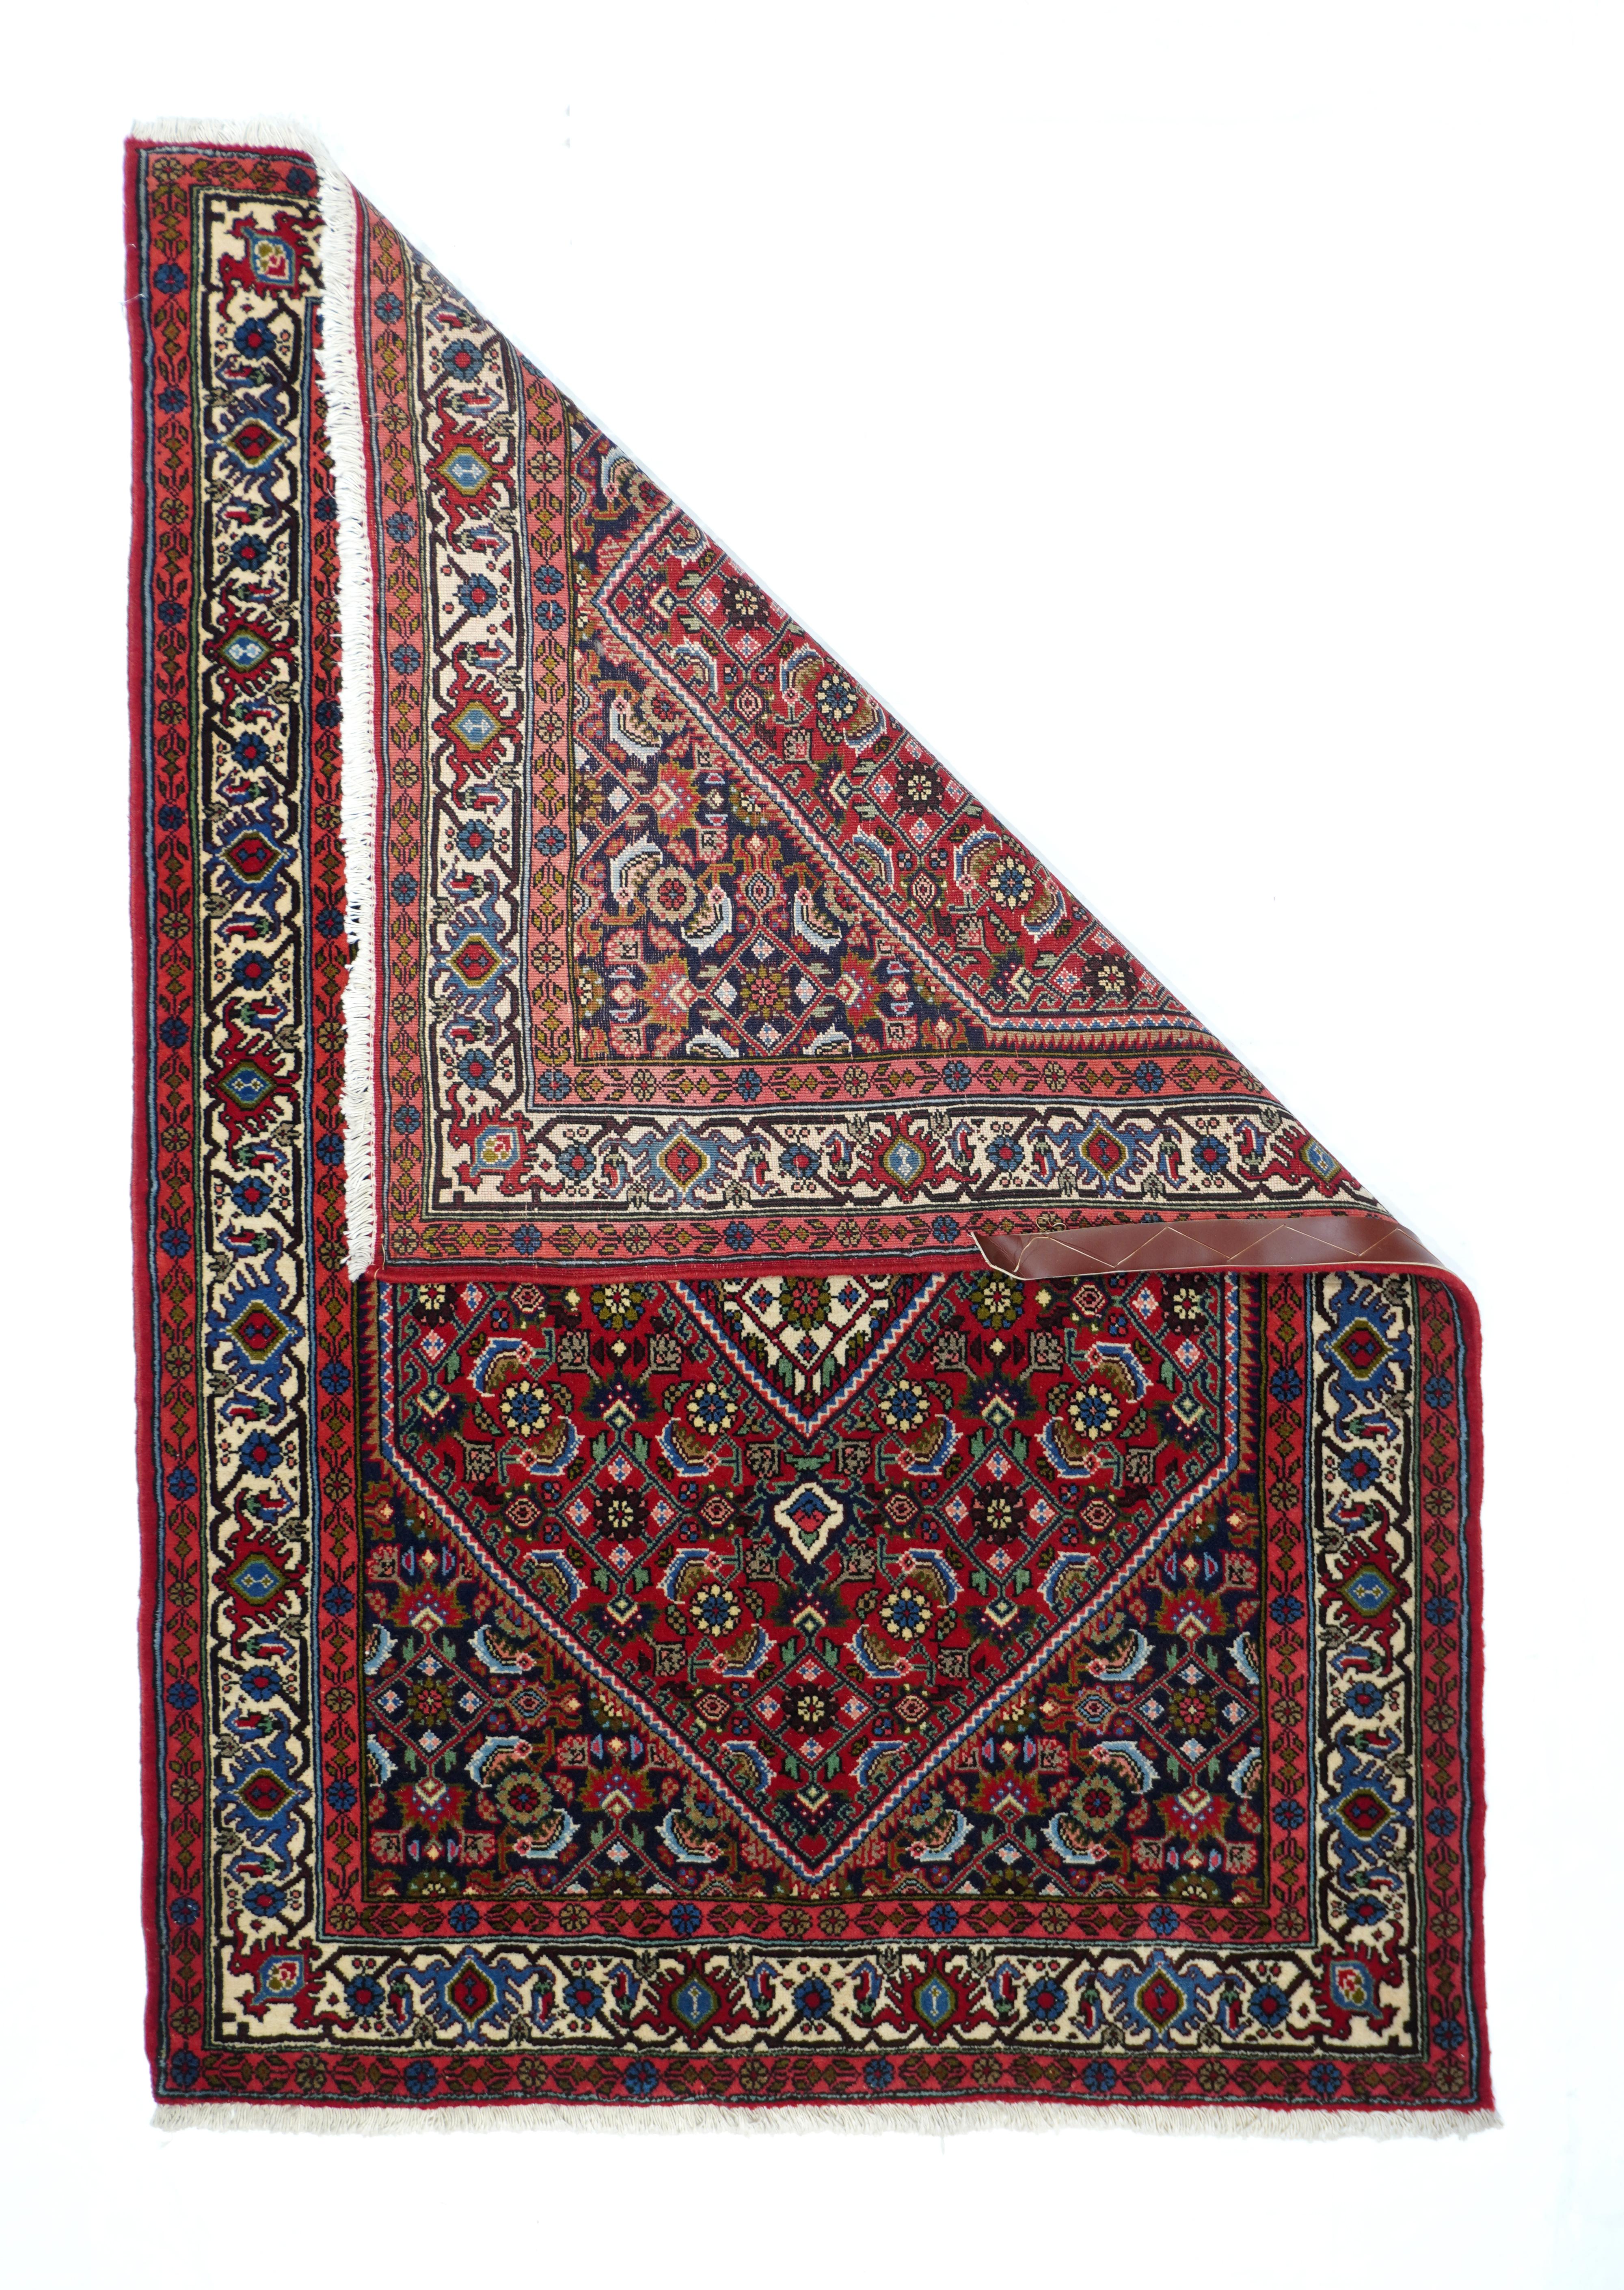 Vintage Bidjar Rug 3'7'' x 5'1''. The red field uniformly displays an allover four column Herati design of palmettes, rosettes, curved leaves and open lozenges, accented in navy, cream and rust. Straw and mid-blue reciprocal trapezoid border with